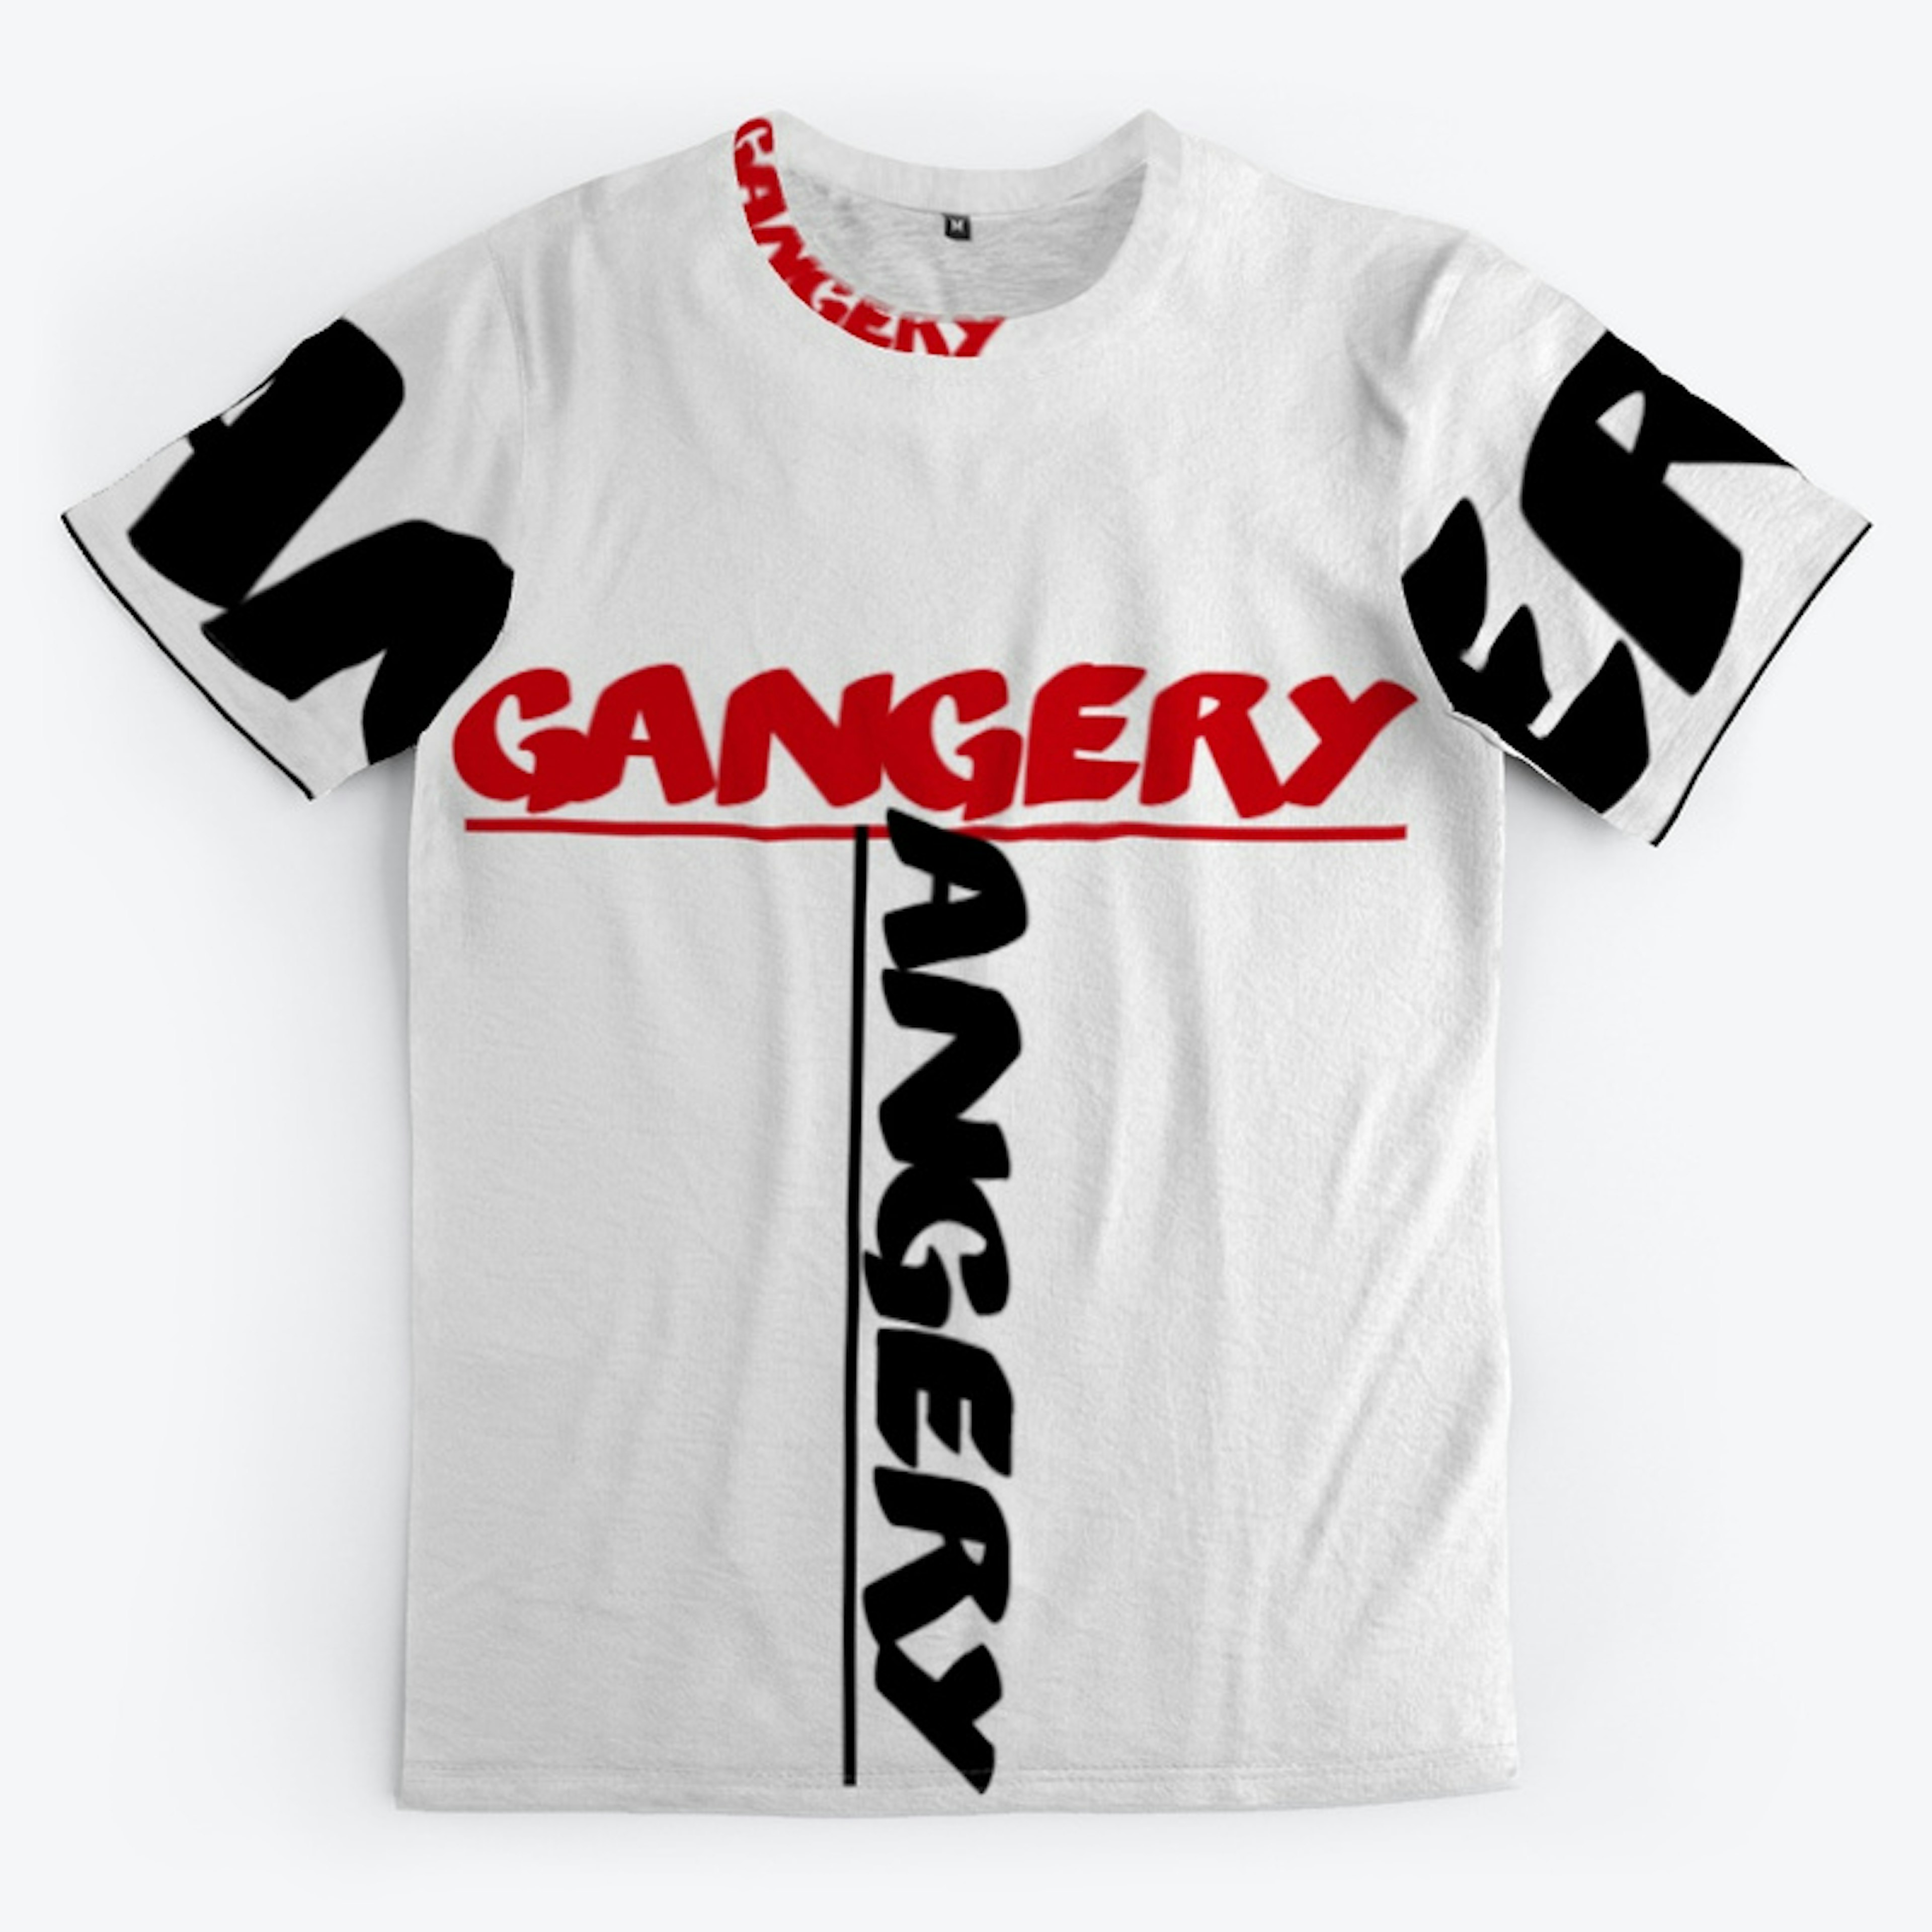 THE GANGERY COLLECTION